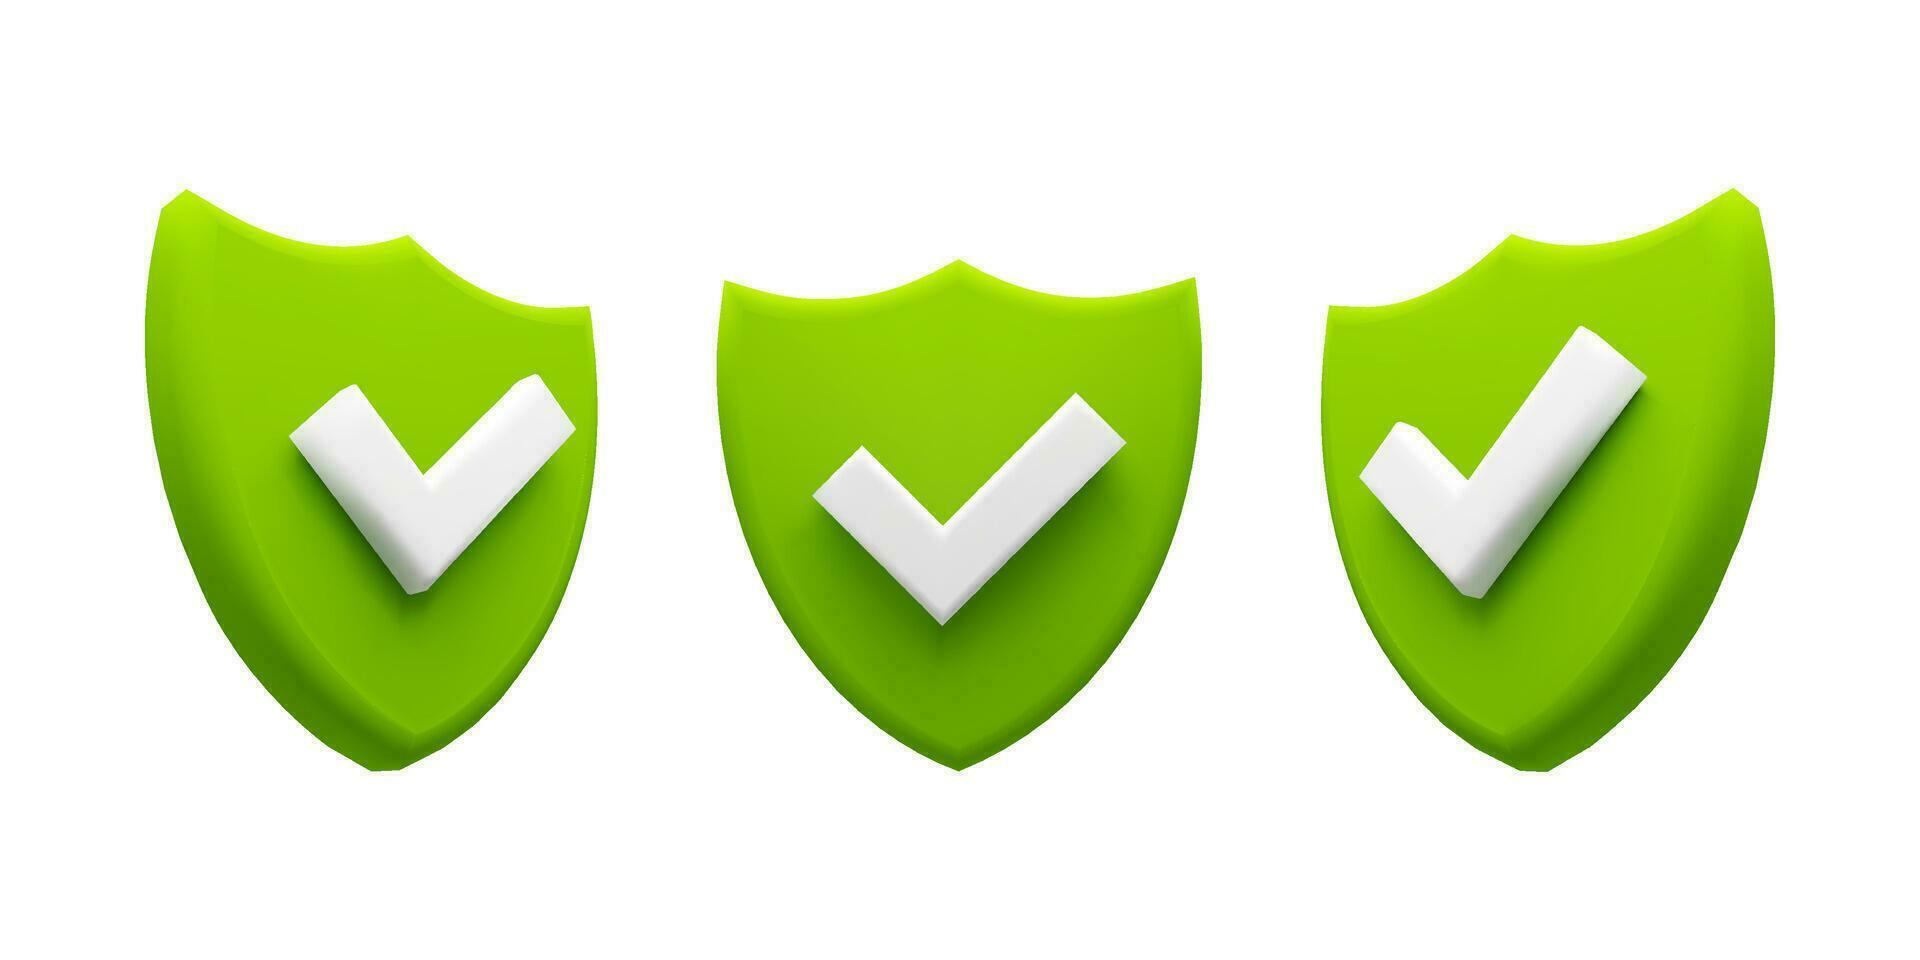 Set of Green Shield with White Checkmark, Symbolizing Security, Protection, and Verification vector